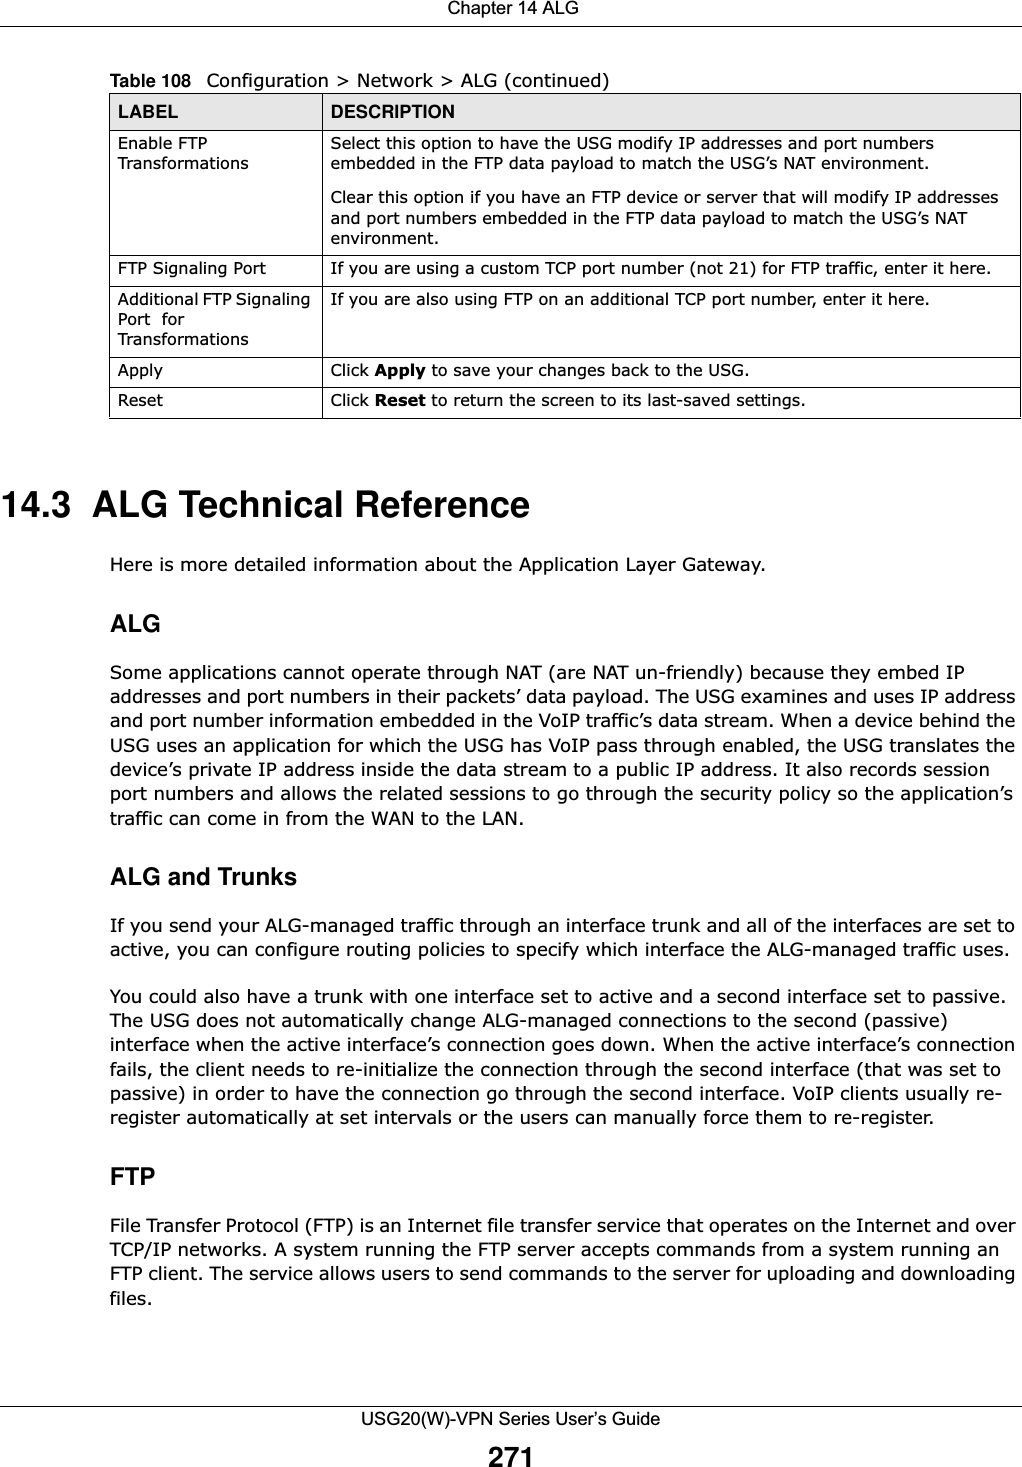  Chapter 14 ALGUSG20(W)-VPN Series User’s Guide27114.3  ALG Technical ReferenceHere is more detailed information about the Application Layer Gateway.ALGSome applications cannot operate through NAT (are NAT un-friendly) because they embed IP addresses and port numbers in their packets’ data payload. The USG examines and uses IP address and port number information embedded in the VoIP traffic’s data stream. When a device behind the USG uses an application for which the USG has VoIP pass through enabled, the USG translates the device’s private IP address inside the data stream to a public IP address. It also records session port numbers and allows the related sessions to go through the security policy so the application’s traffic can come in from the WAN to the LAN. ALG and TrunksIf you send your ALG-managed traffic through an interface trunk and all of the interfaces are set to active, you can configure routing policies to specify which interface the ALG-managed traffic uses.You could also have a trunk with one interface set to active and a second interface set to passive. The USG does not automatically change ALG-managed connections to the second (passive) interface when the active interface’s connection goes down. When the active interface’s connection fails, the client needs to re-initialize the connection through the second interface (that was set to passive) in order to have the connection go through the second interface. VoIP clients usually re-register automatically at set intervals or the users can manually force them to re-register.FTPFile Transfer Protocol (FTP) is an Internet file transfer service that operates on the Internet and over TCP/IP networks. A system running the FTP server accepts commands from a system running an FTP client. The service allows users to send commands to the server for uploading and downloading files. Enable FTP TransformationsSelect this option to have the USG modify IP addresses and port numbers embedded in the FTP data payload to match the USG’s NAT environment. Clear this option if you have an FTP device or server that will modify IP addresses and port numbers embedded in the FTP data payload to match the USG’s NAT environment.FTP Signaling Port  If you are using a custom TCP port number (not 21) for FTP traffic, enter it here. Additional FTP Signaling Port  for TransformationsIf you are also using FTP on an additional TCP port number, enter it here. Apply Click Apply to save your changes back to the USG.Reset Click Reset to return the screen to its last-saved settings. Table 108   Configuration &gt; Network &gt; ALG (continued)LABEL DESCRIPTION